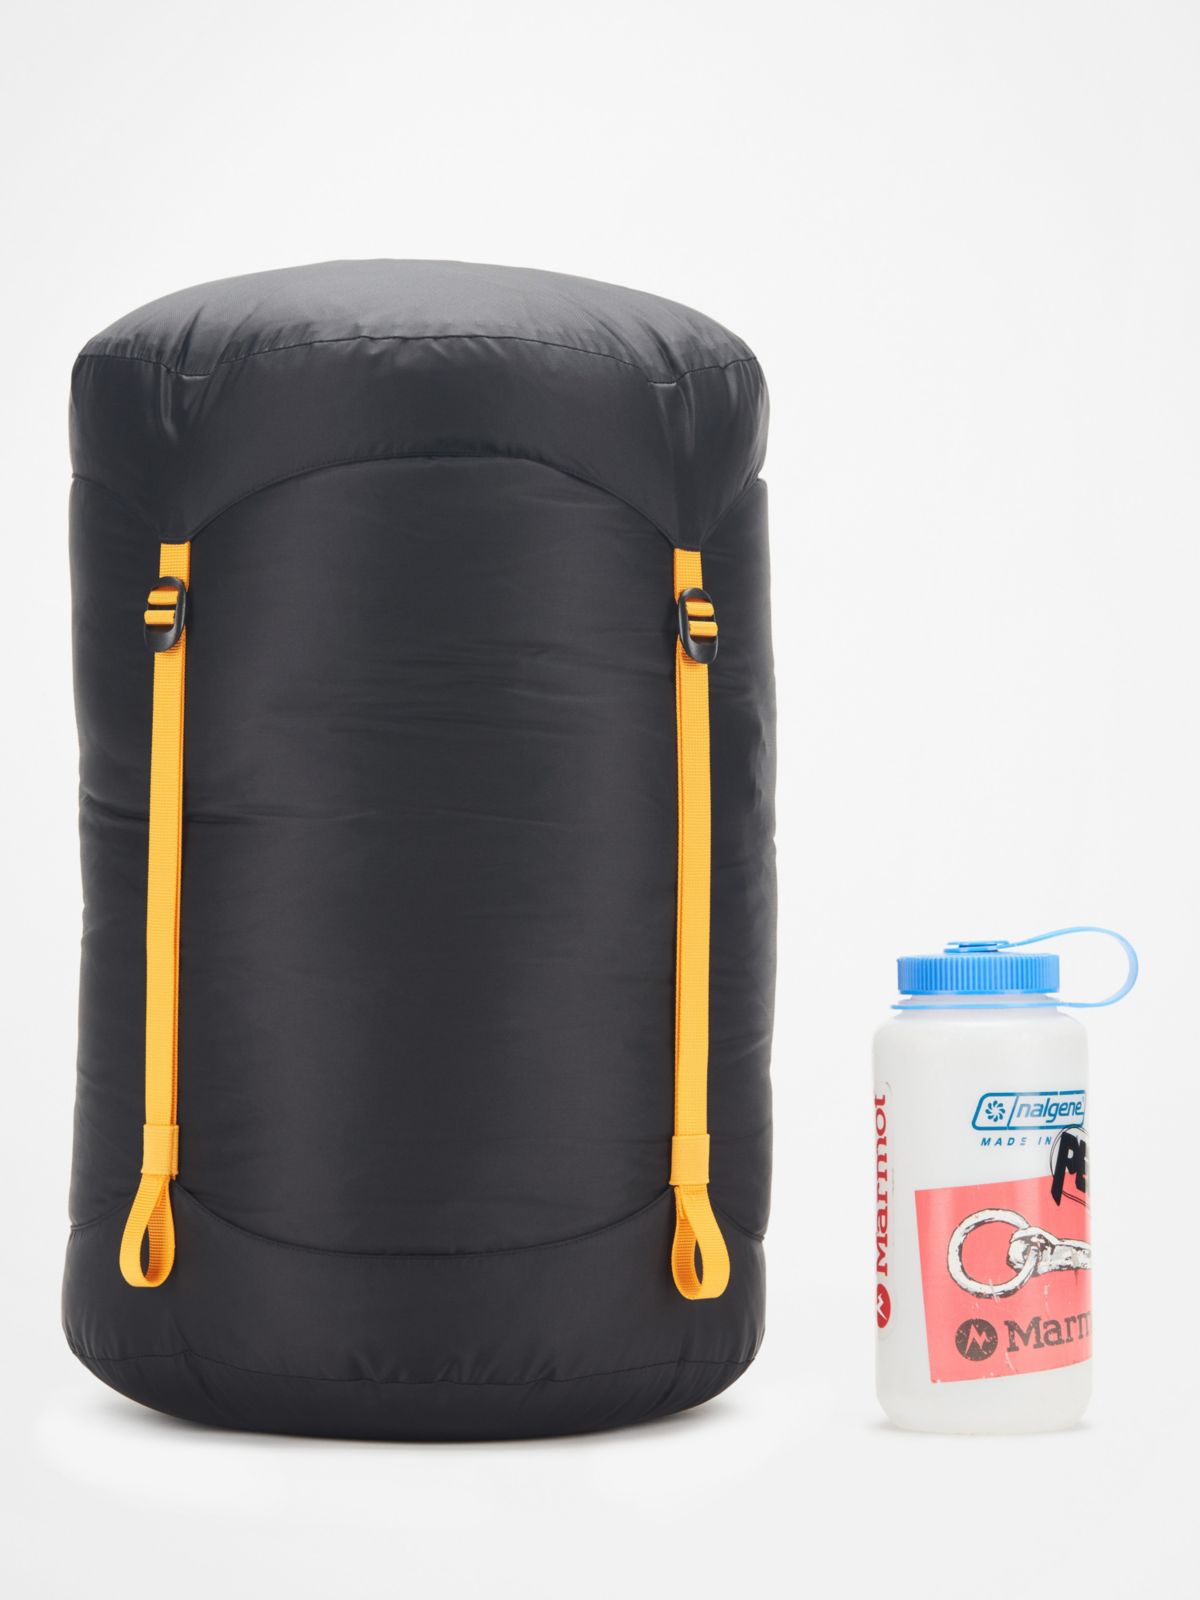 tent carry bag and water bottle